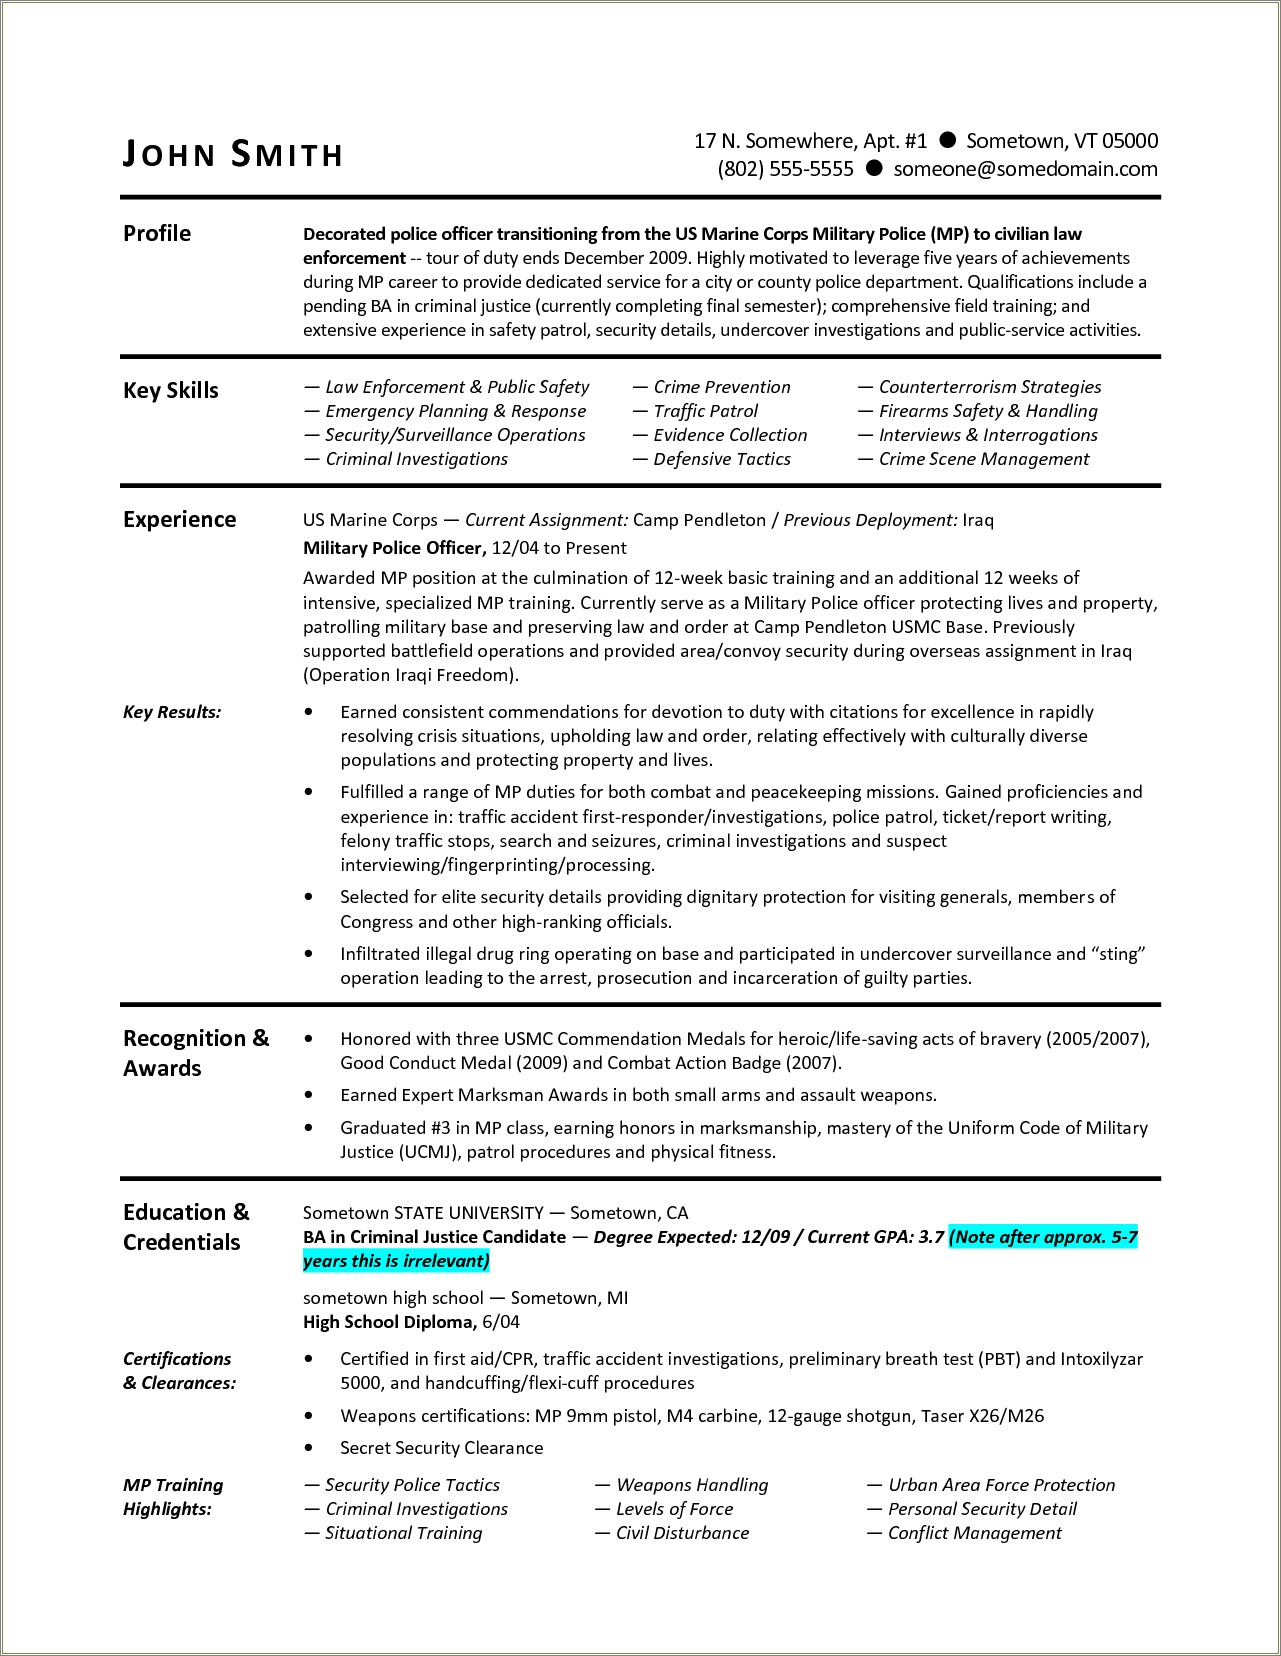 Where To Put Clearance On Federal Resume